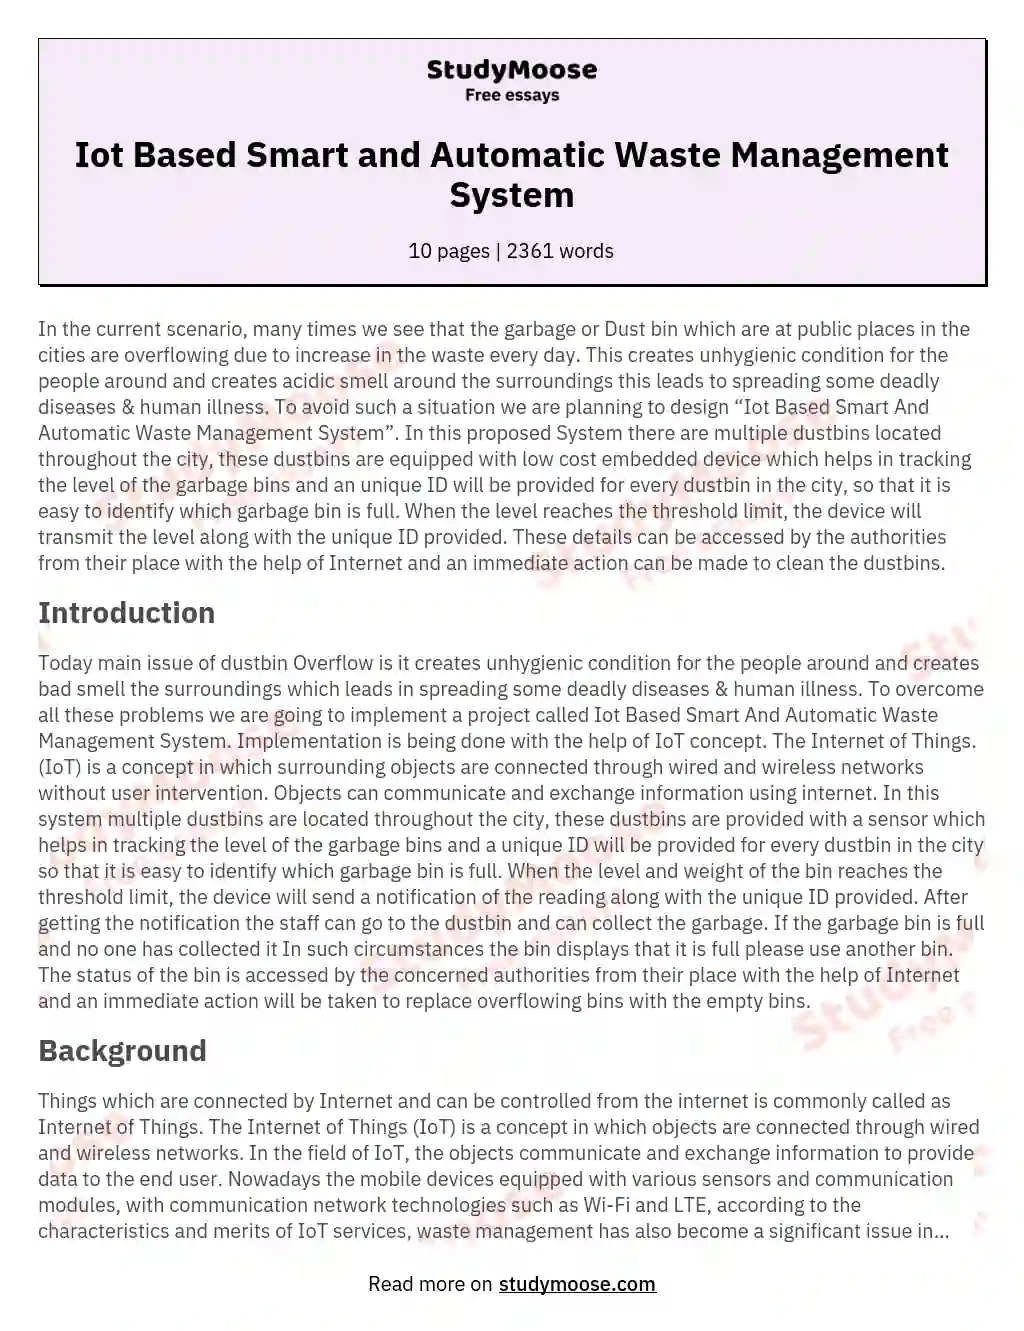 Iot Based Smart and Automatic Waste Management System essay